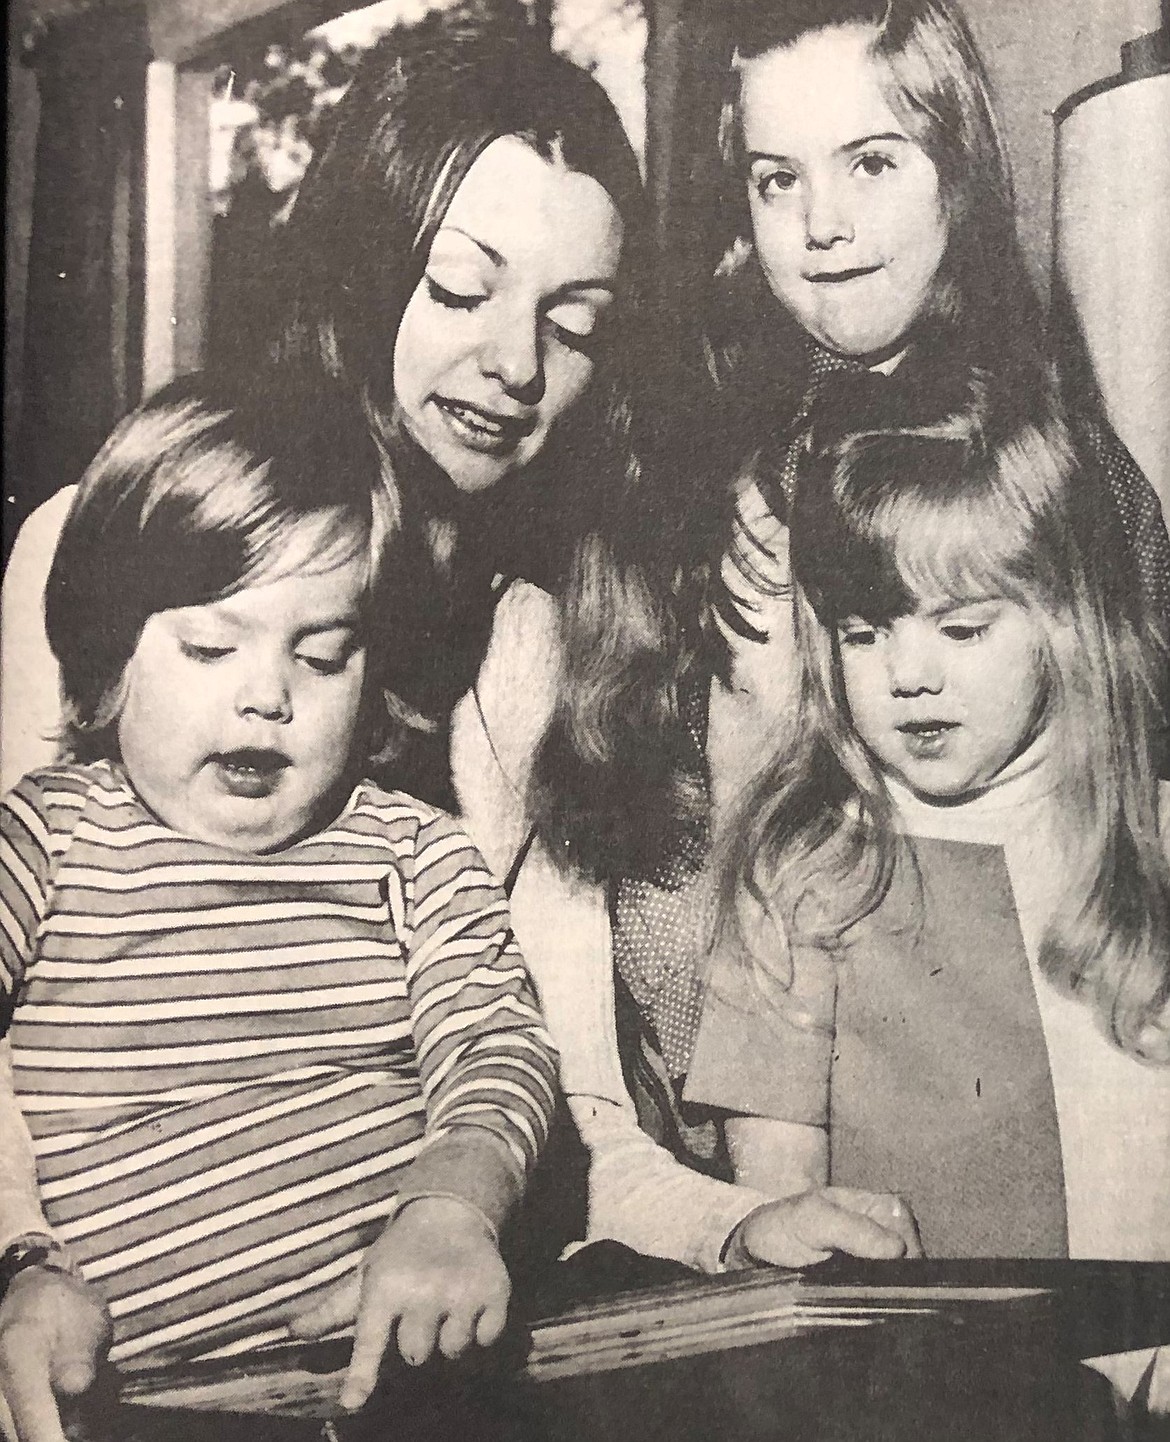 In January 1973, Judy McMurray is shown with three children: Lisa, 6, Christine, 3, and John, 2.